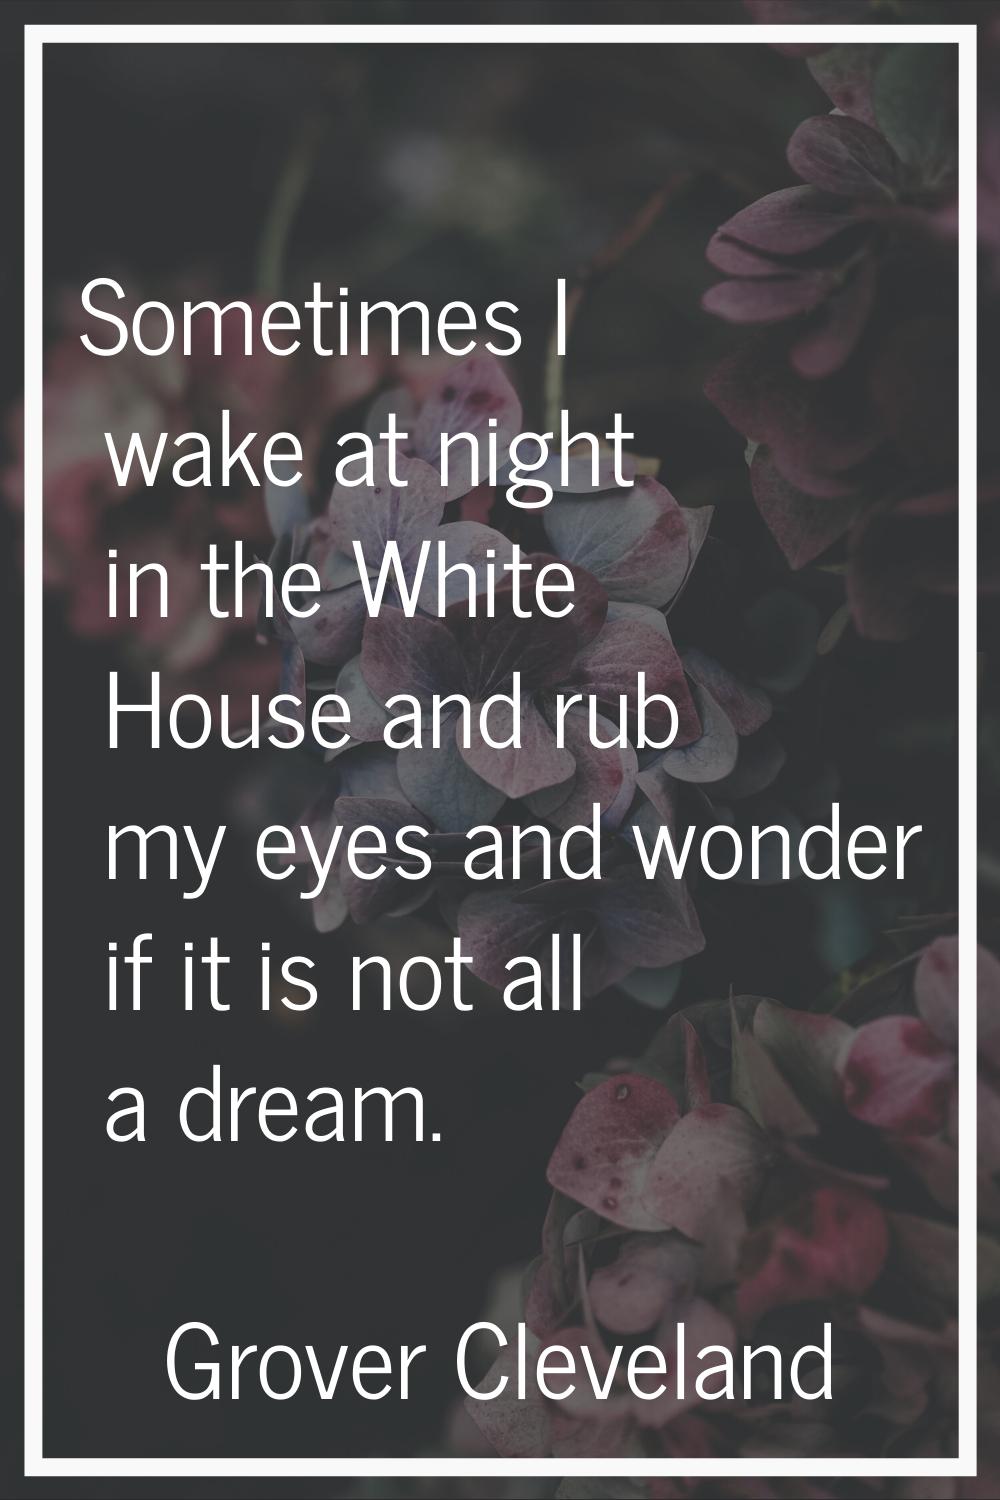 Sometimes I wake at night in the White House and rub my eyes and wonder if it is not all a dream.